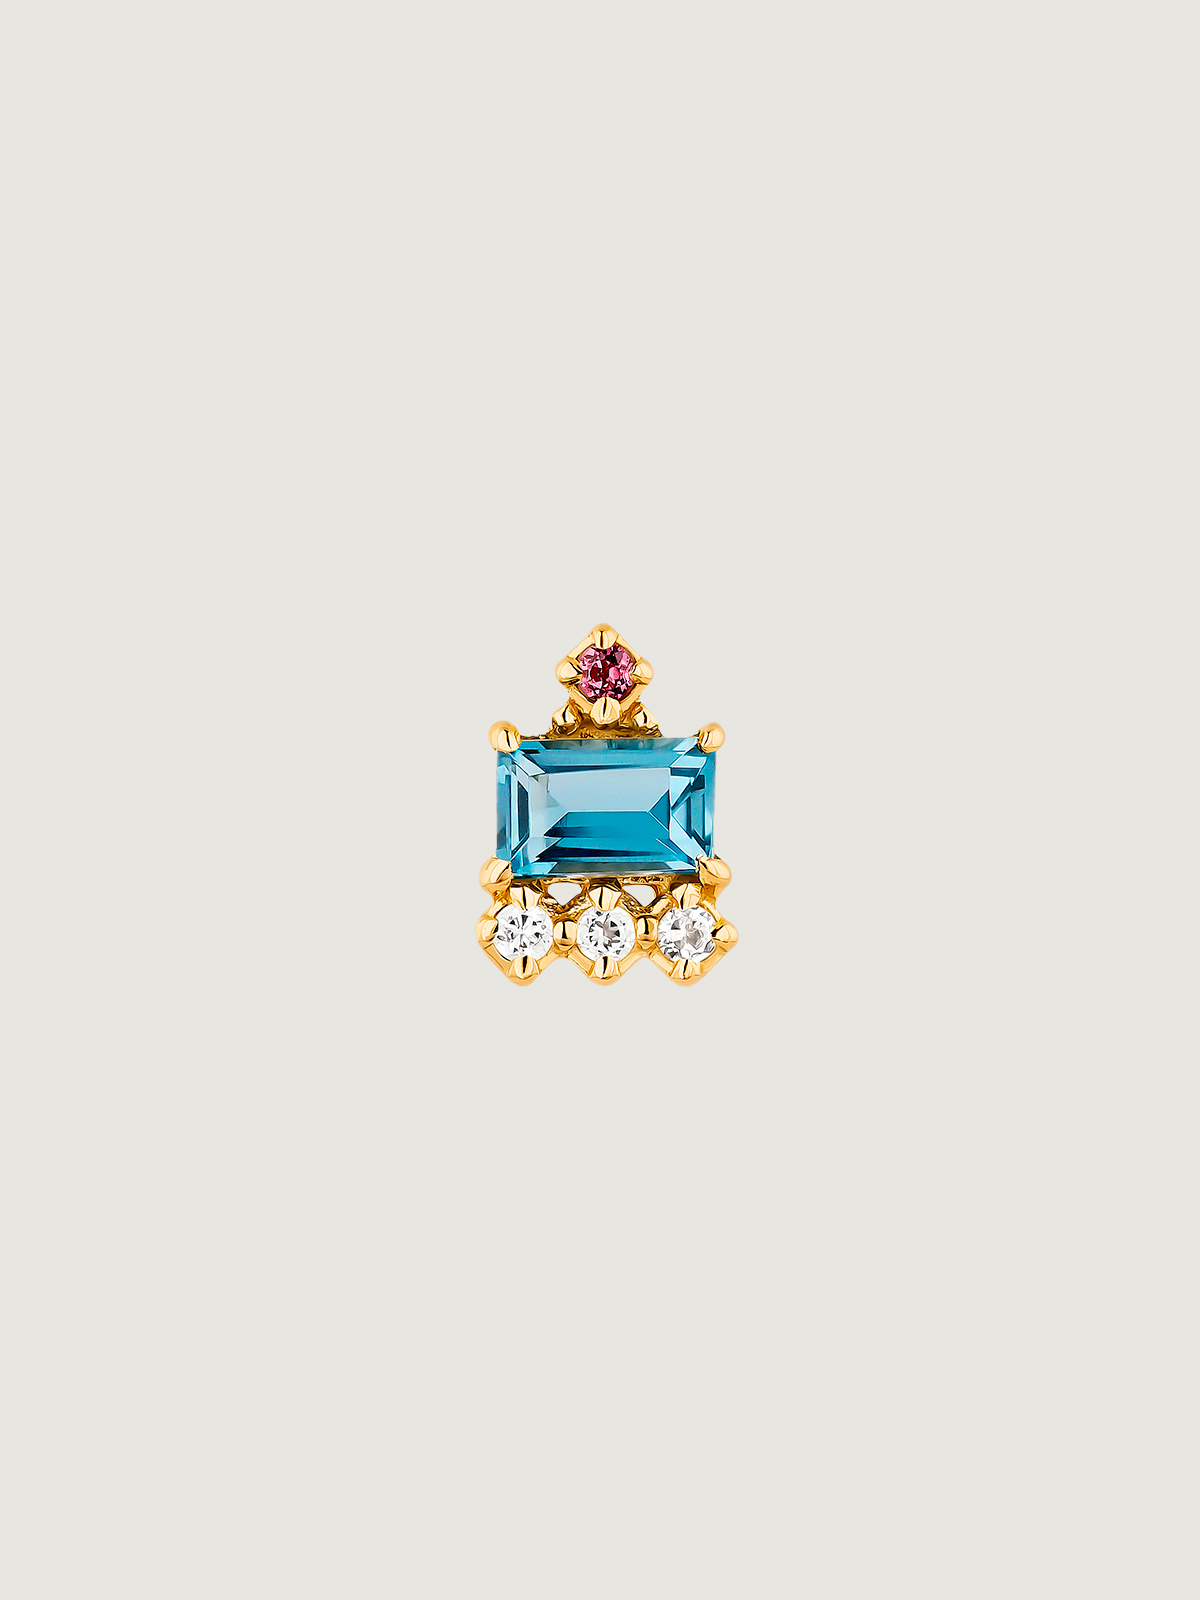 Individual 925 silver earring bathed in 18K yellow gold with white and London blue topaz and pink rhodolite.